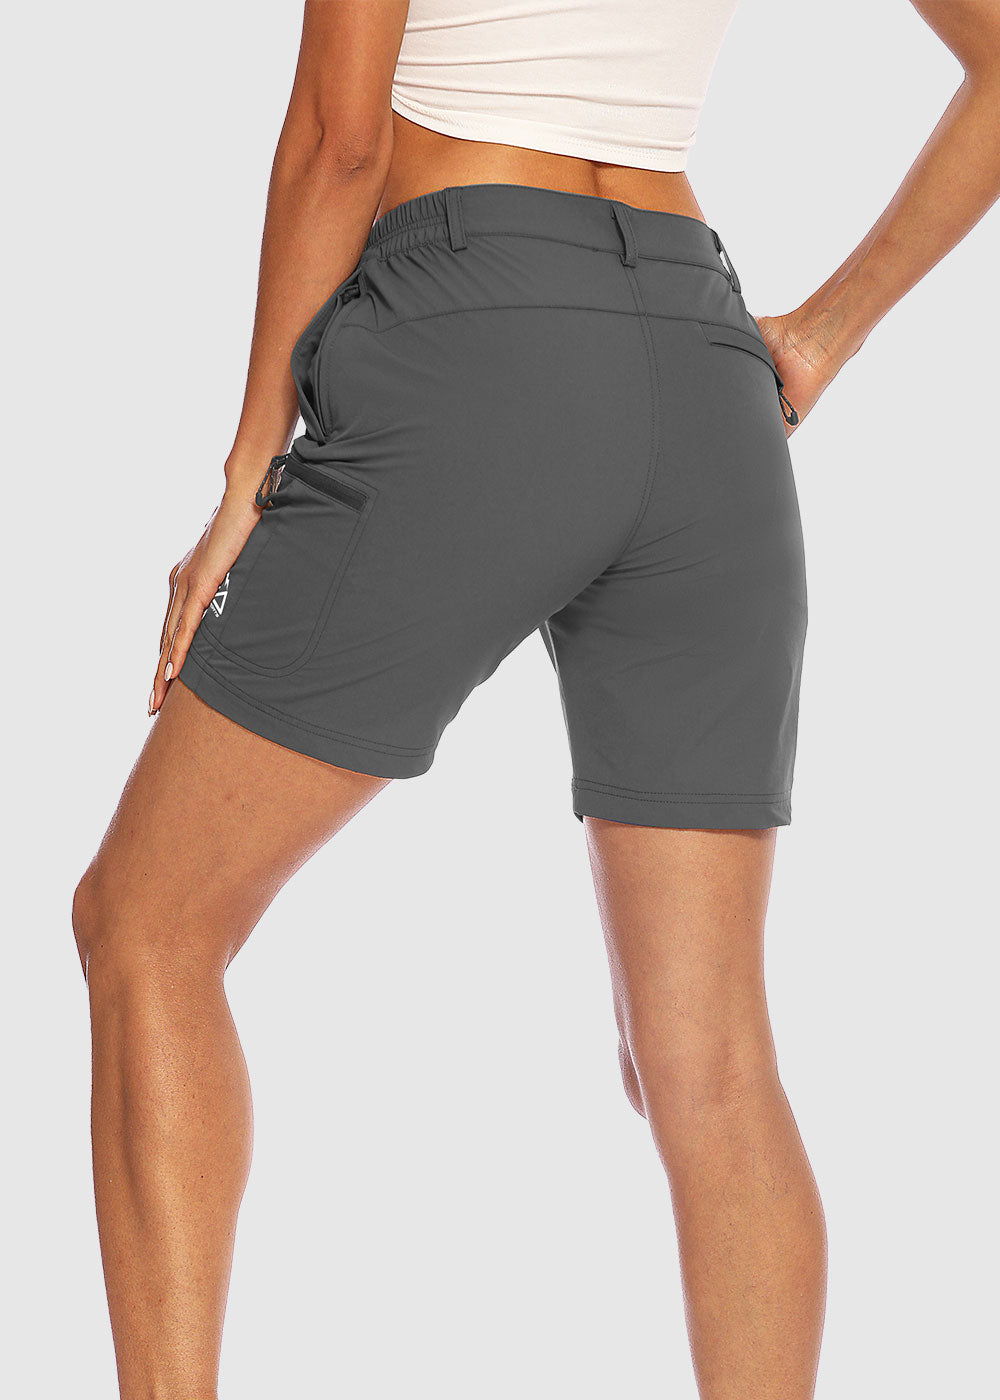 WindRiver Women's Performance Quick Dry Shorts with Zippered Cargo Pockets